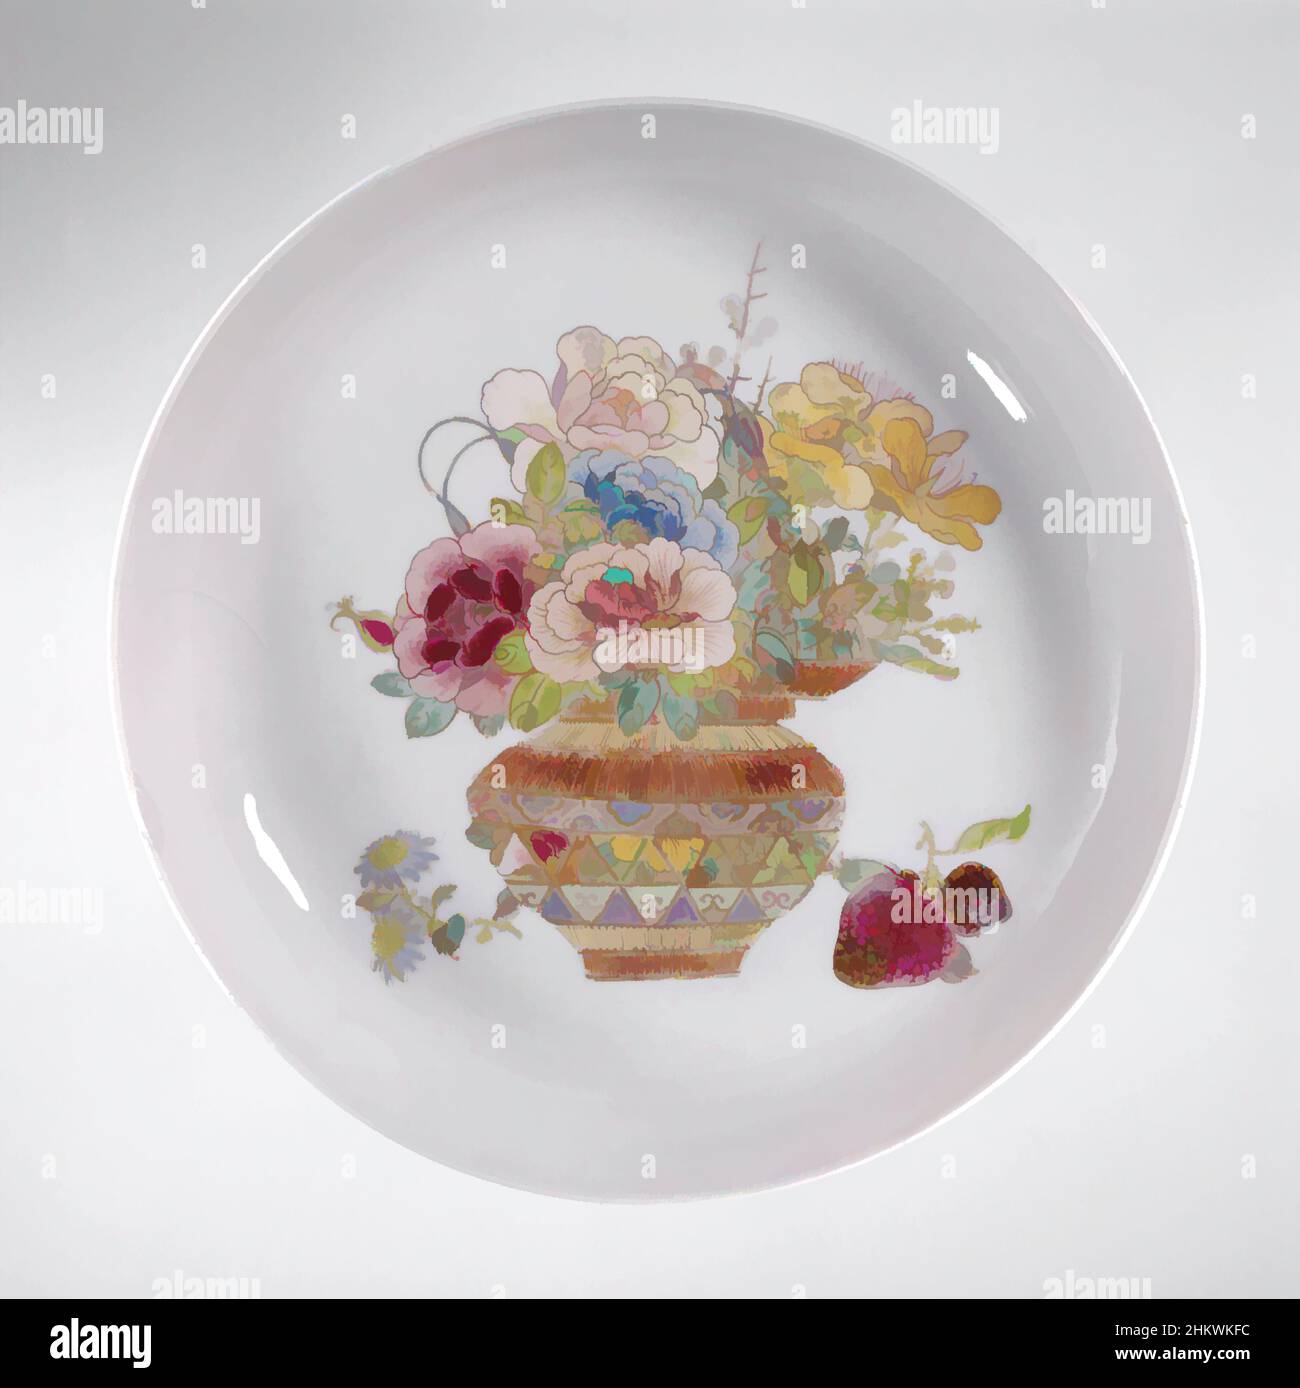 Art inspired by Saucer-dish with a flower basket and lichees, Saucer of porcelain, covered with a pink glaze and painted on the glaze in blue, red, pink, green, yellow, black and gold. On the flat a flower basket with an aster beside it and a branch with two lychees; the reverse is, Classic works modernized by Artotop with a splash of modernity. Shapes, color and value, eye-catching visual impact on art. Emotions through freedom of artworks in a contemporary way. A timeless message pursuing a wildly creative new direction. Artists turning to the digital medium and creating the Artotop NFT Stock Photo